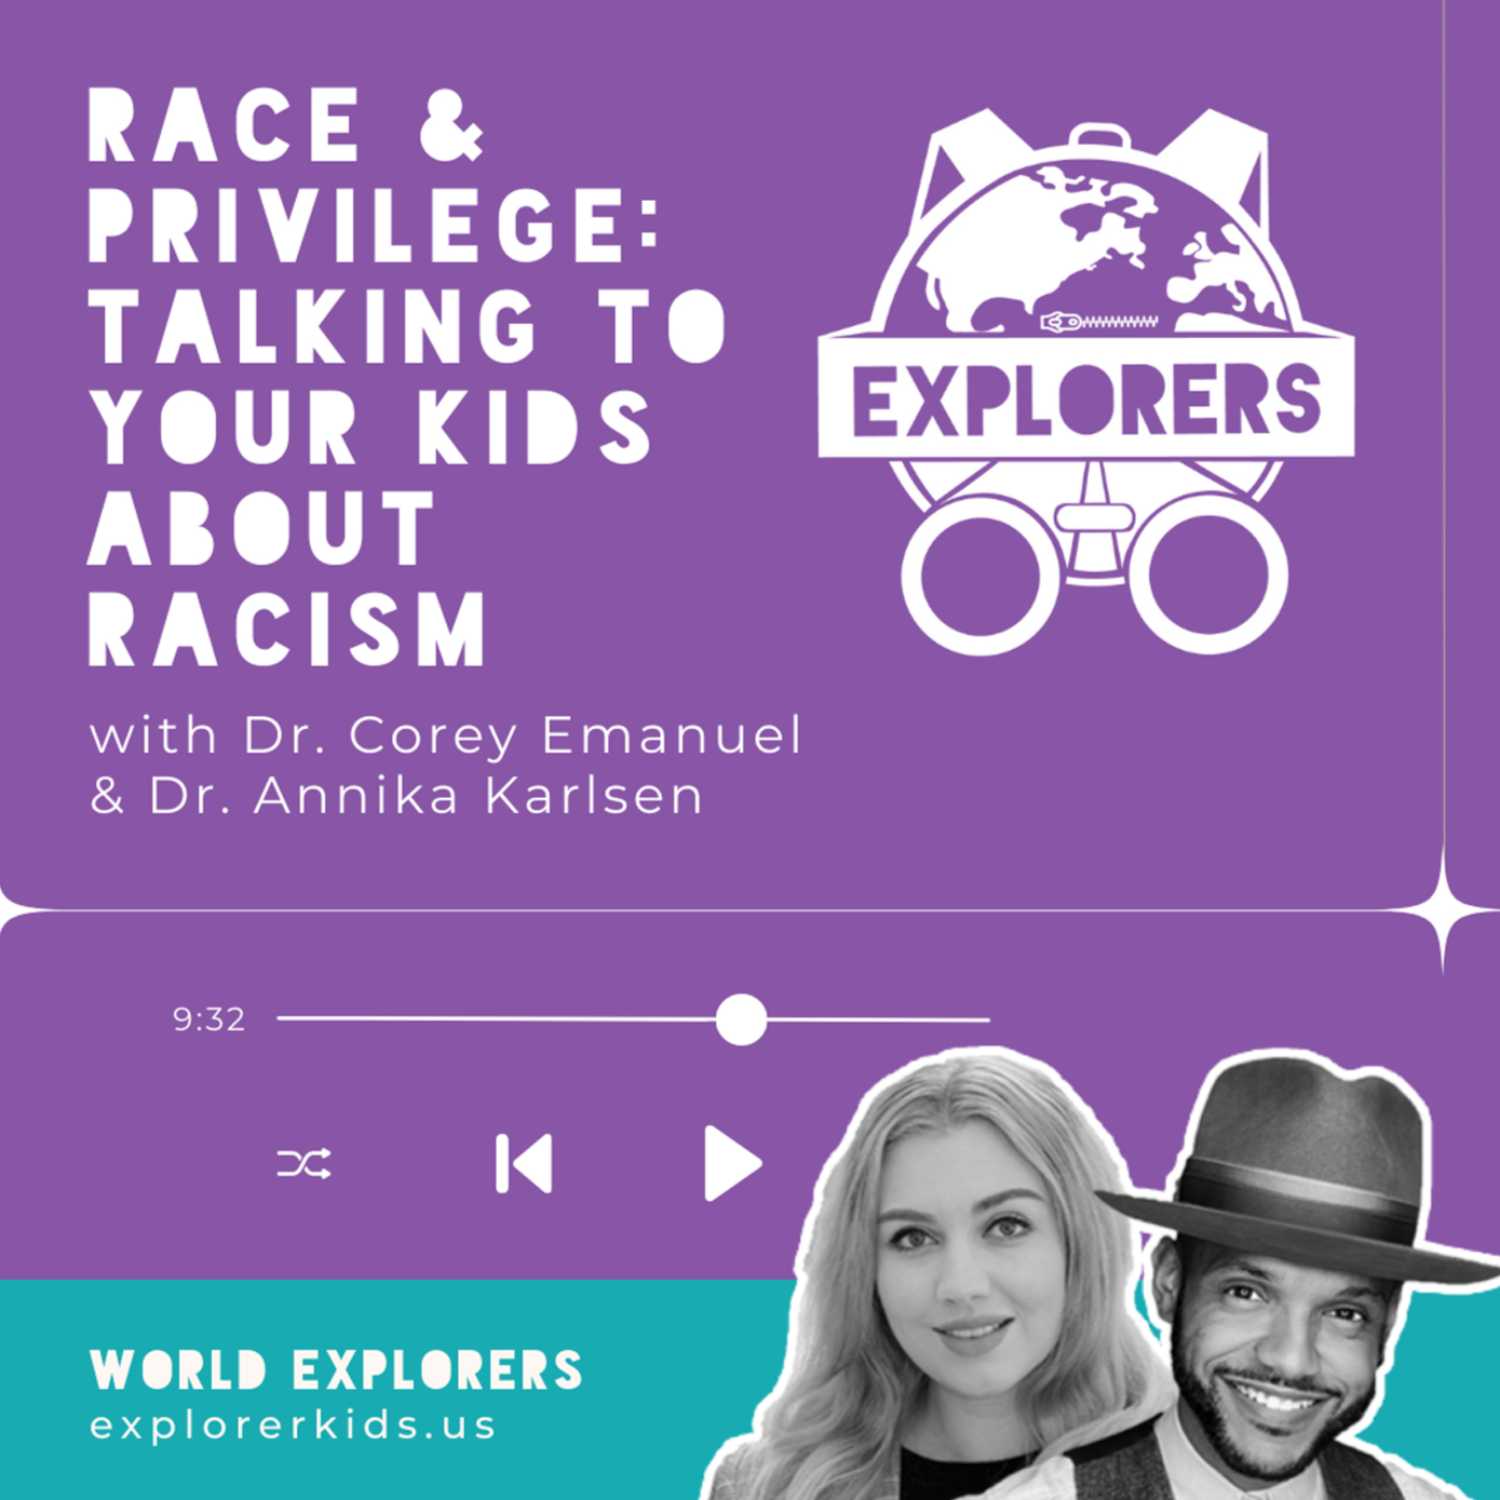 Race & Privilege: Talking to Your Kids About Racism